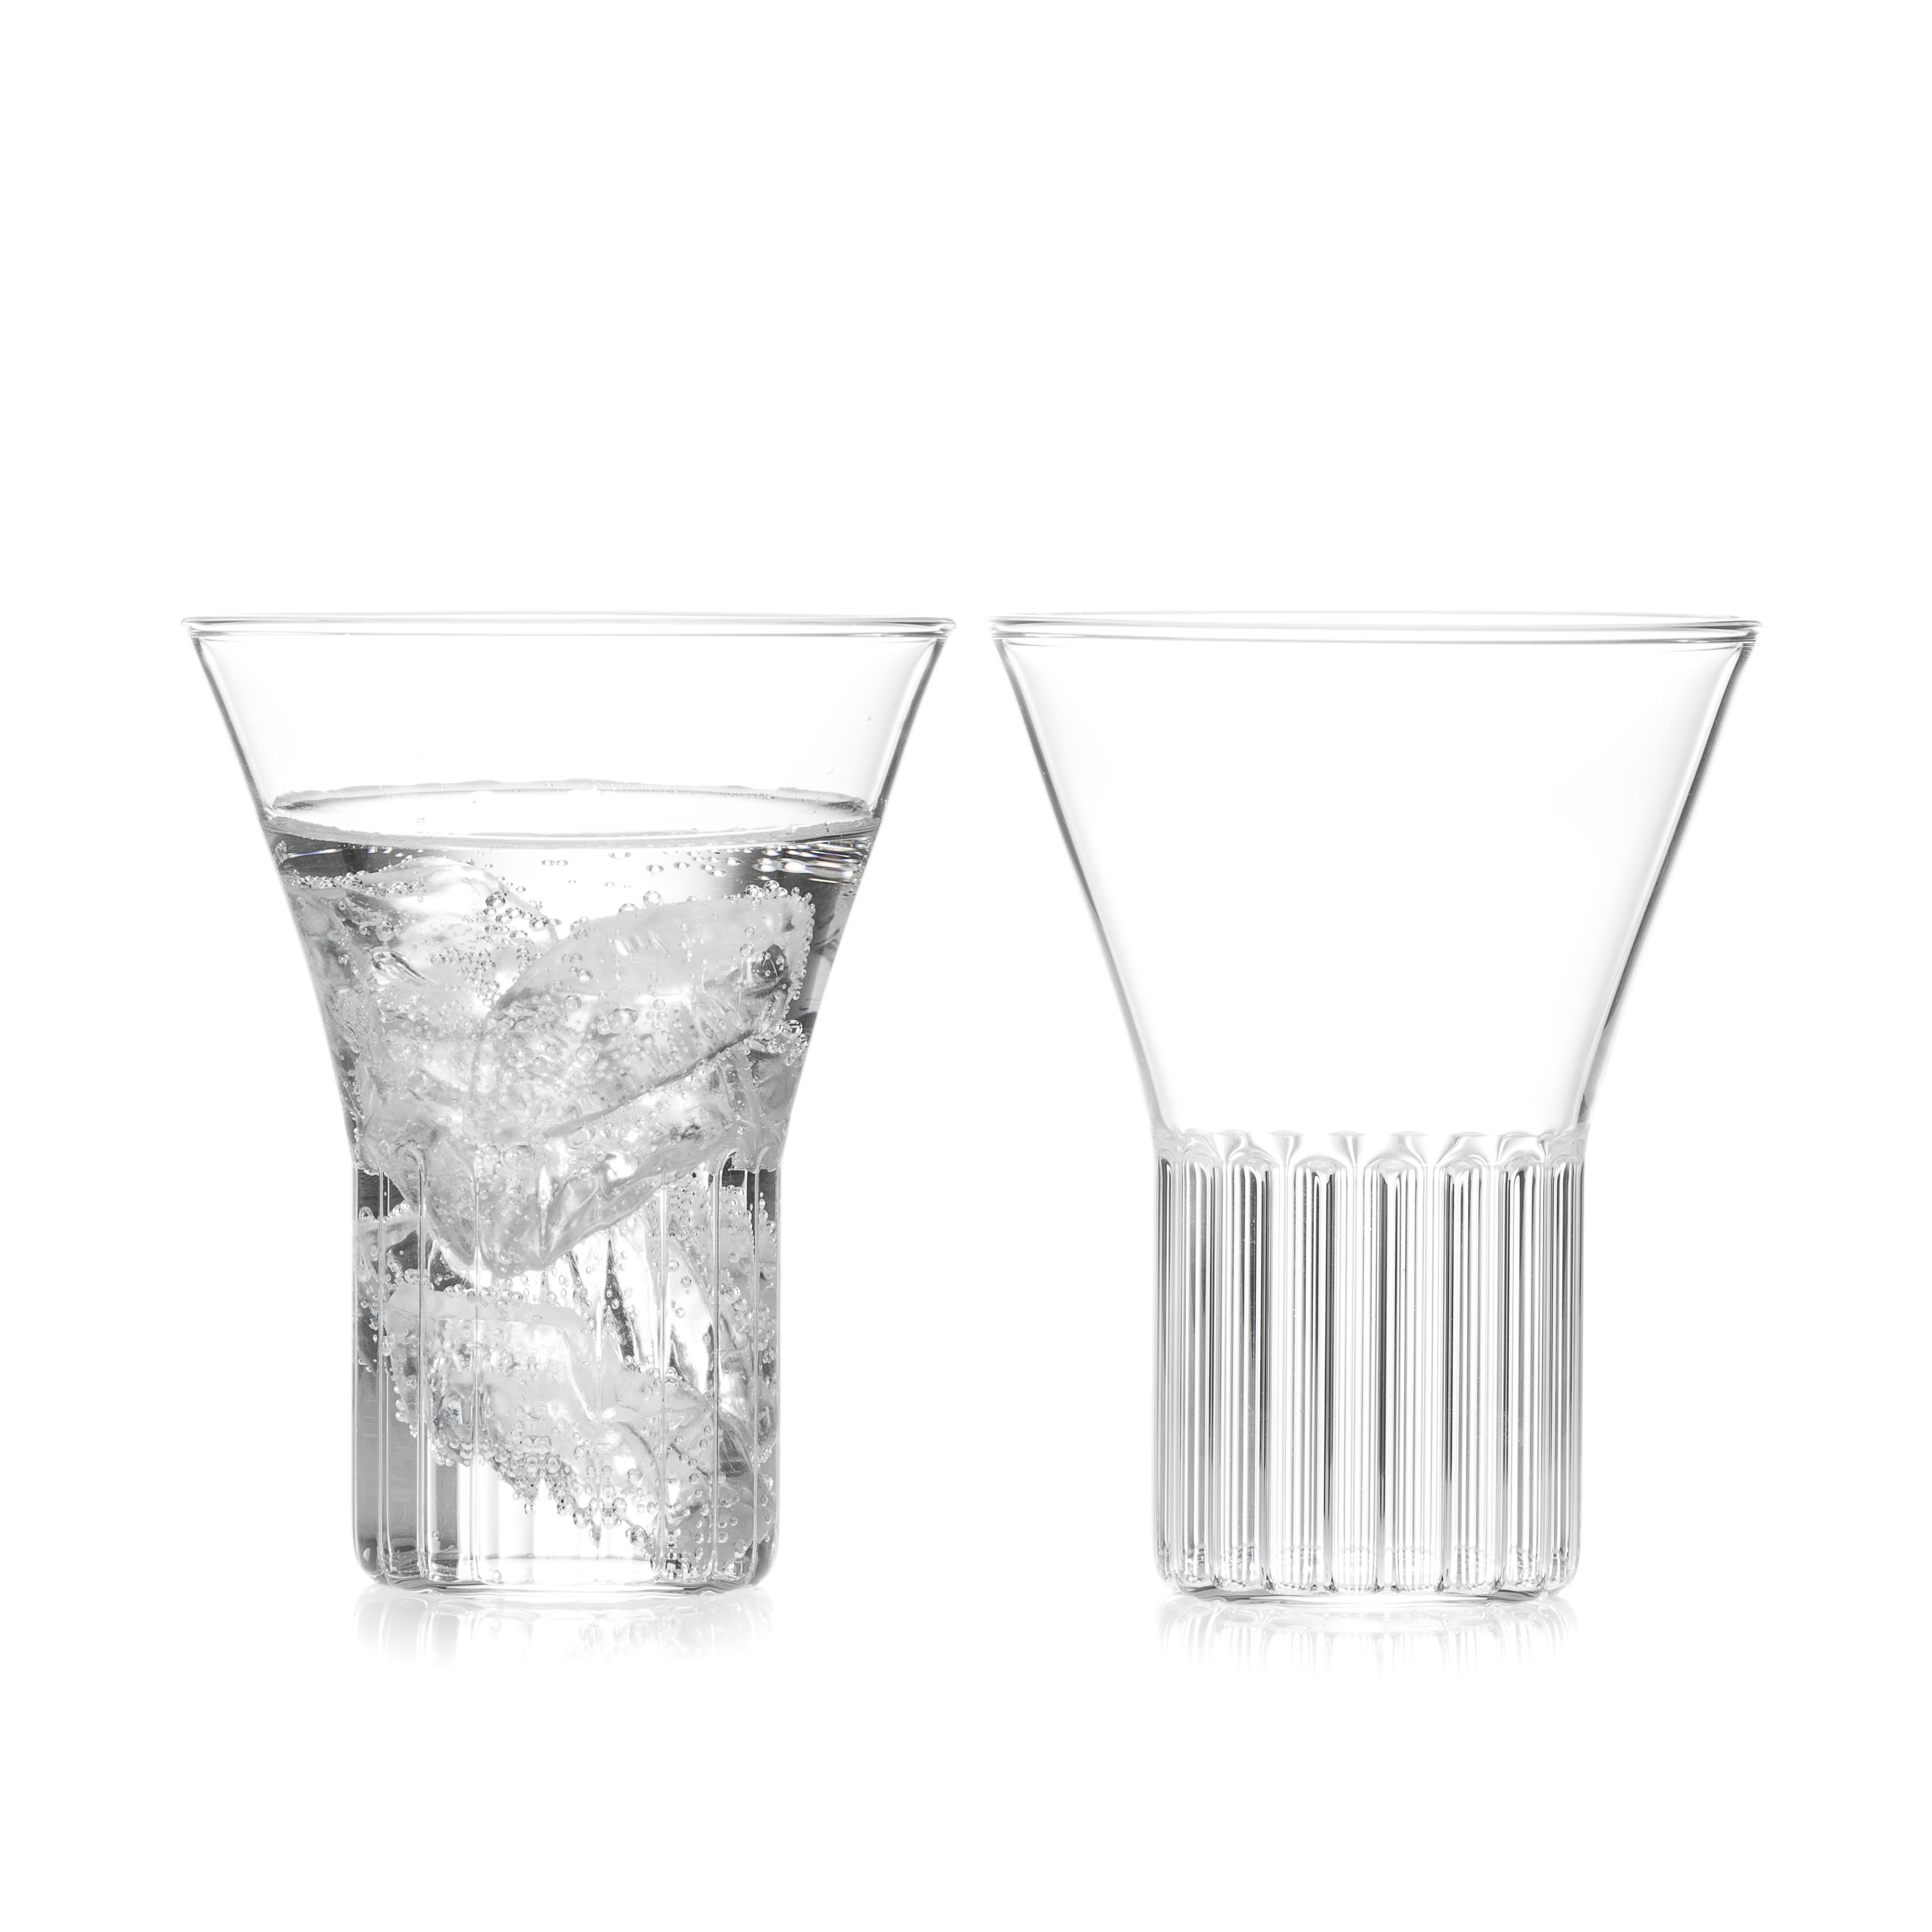 Rila medium glasses, set of two.

Inspired by the Rila Monestary, the clear Czech contemporary Rila collection is a series of glassware ideal for beverages from wine and water to martinis and other beverages. Modern and strikingly simple in form,